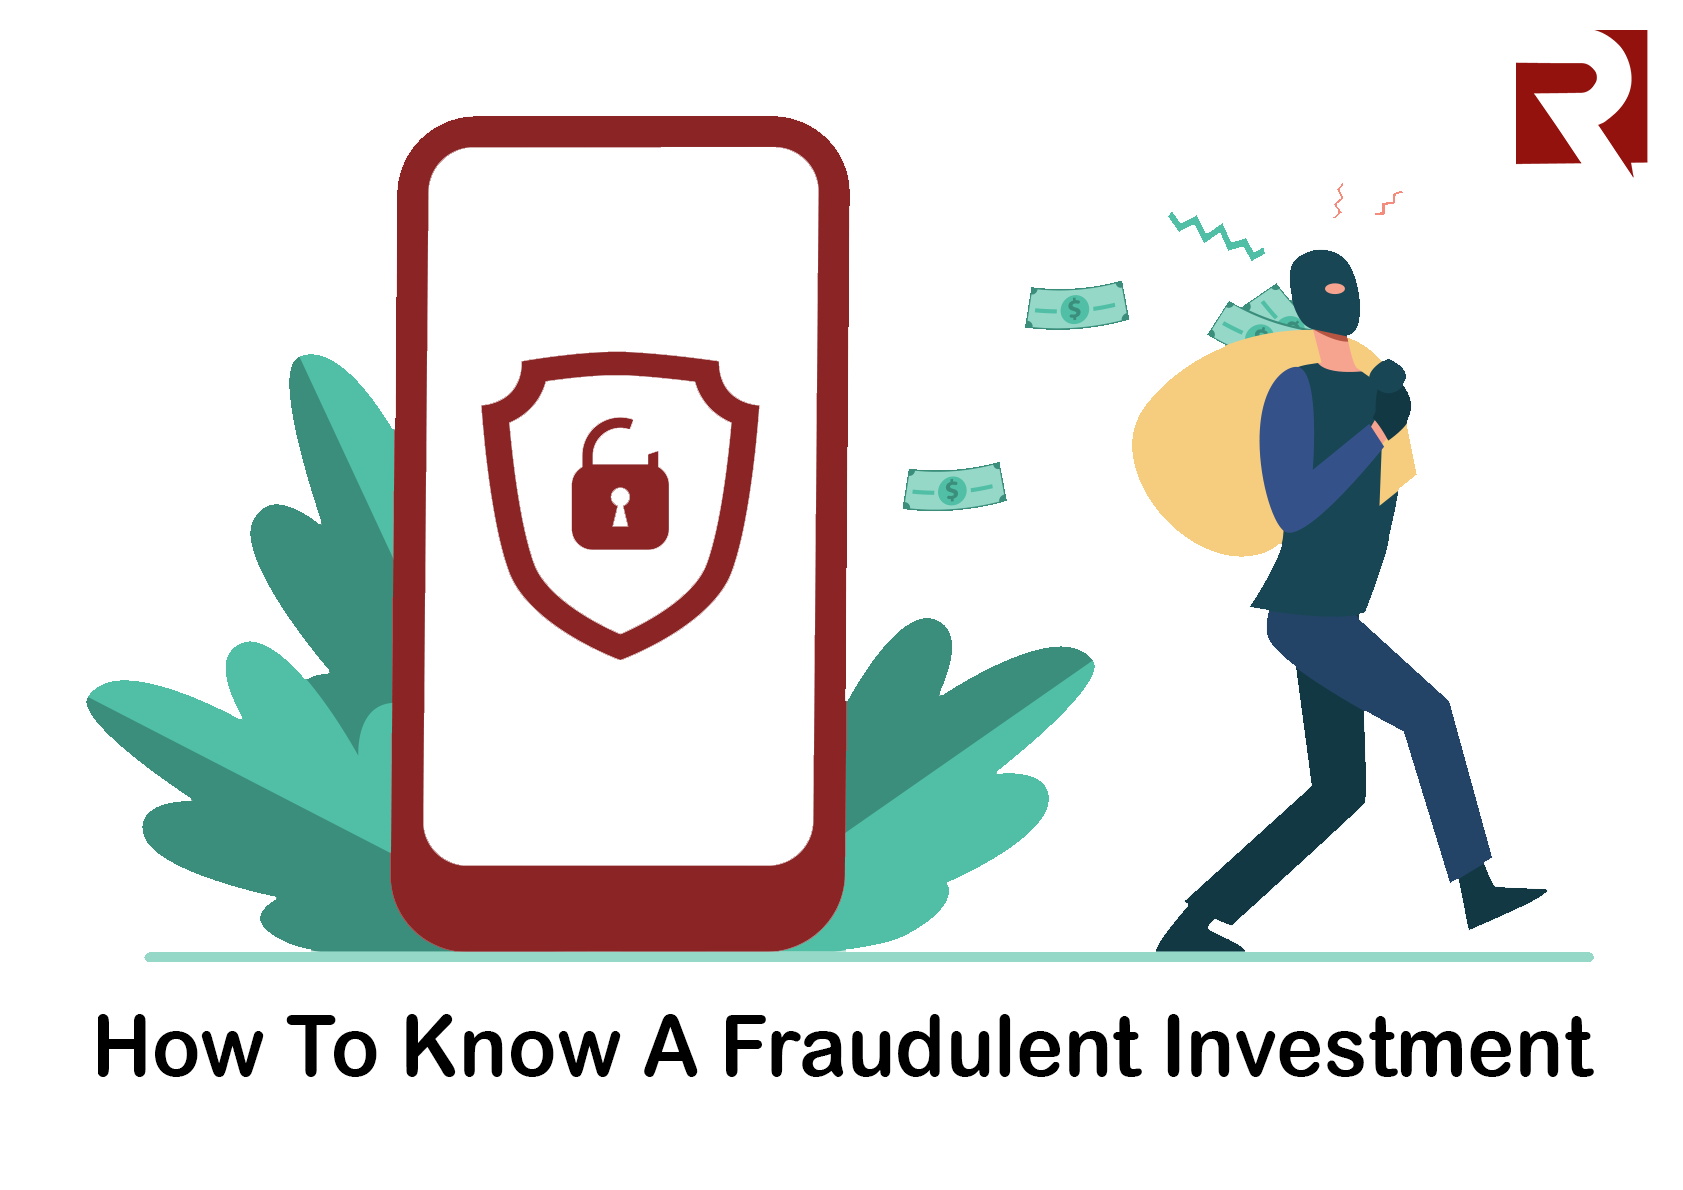 How to Know a Fraudulent Investment